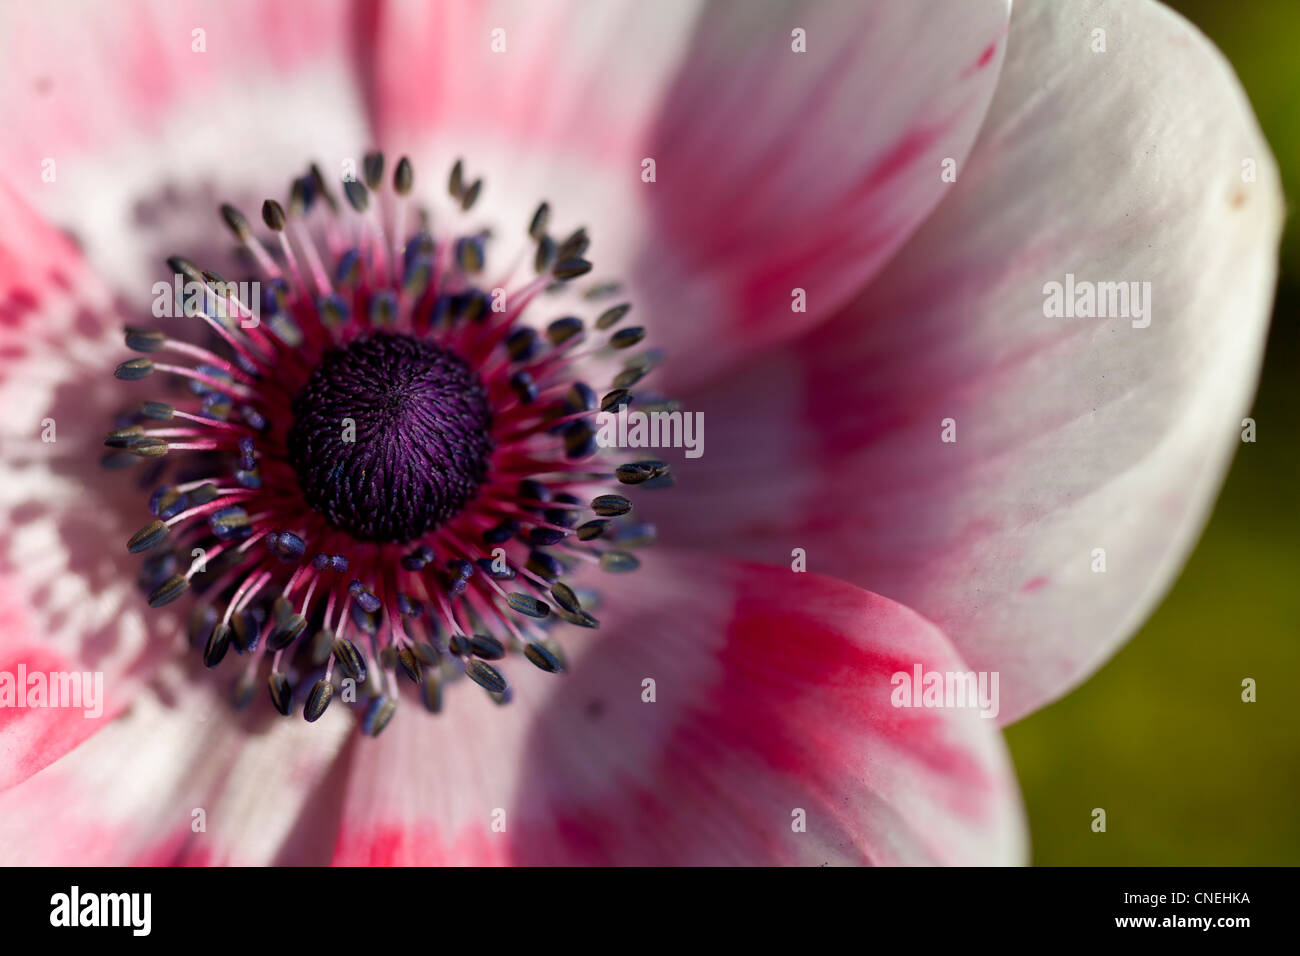 Close-up detail of pink and white anemone flower. Stock Photo